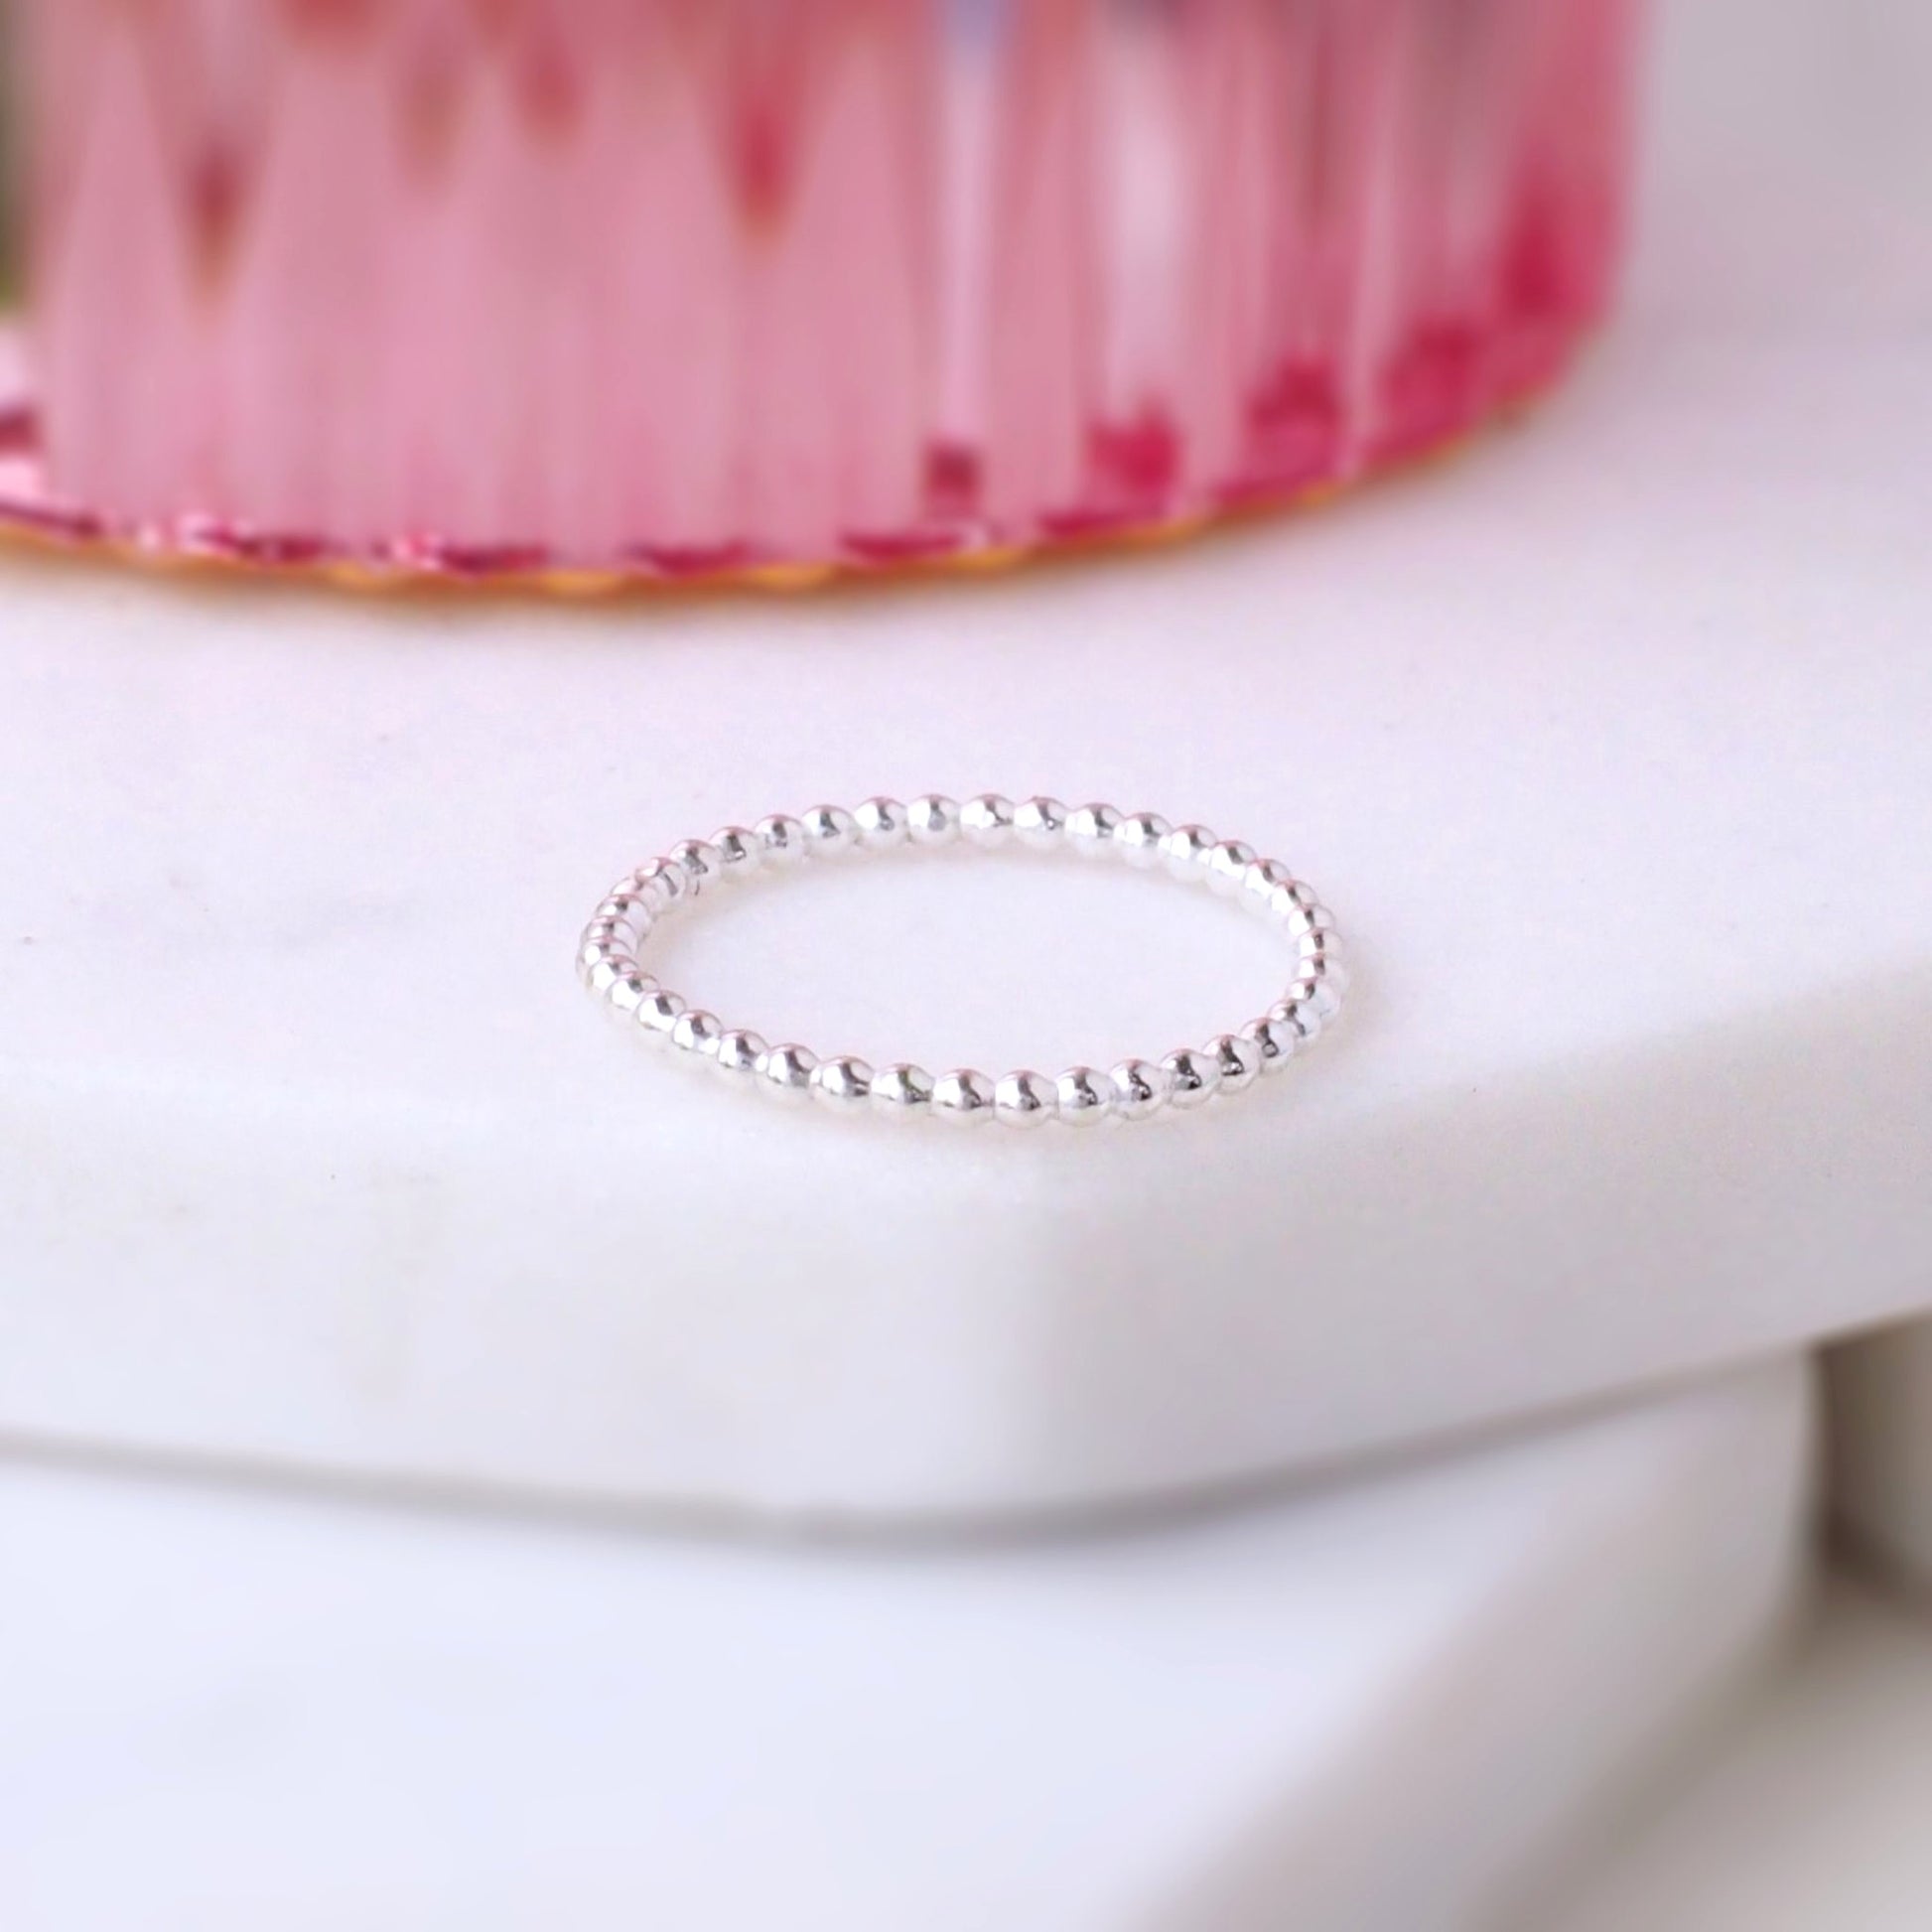 Beaded Dotty bubble style band ring in minimalist style. Handmade to your ring size by maram jewellery in Edinburgh UK